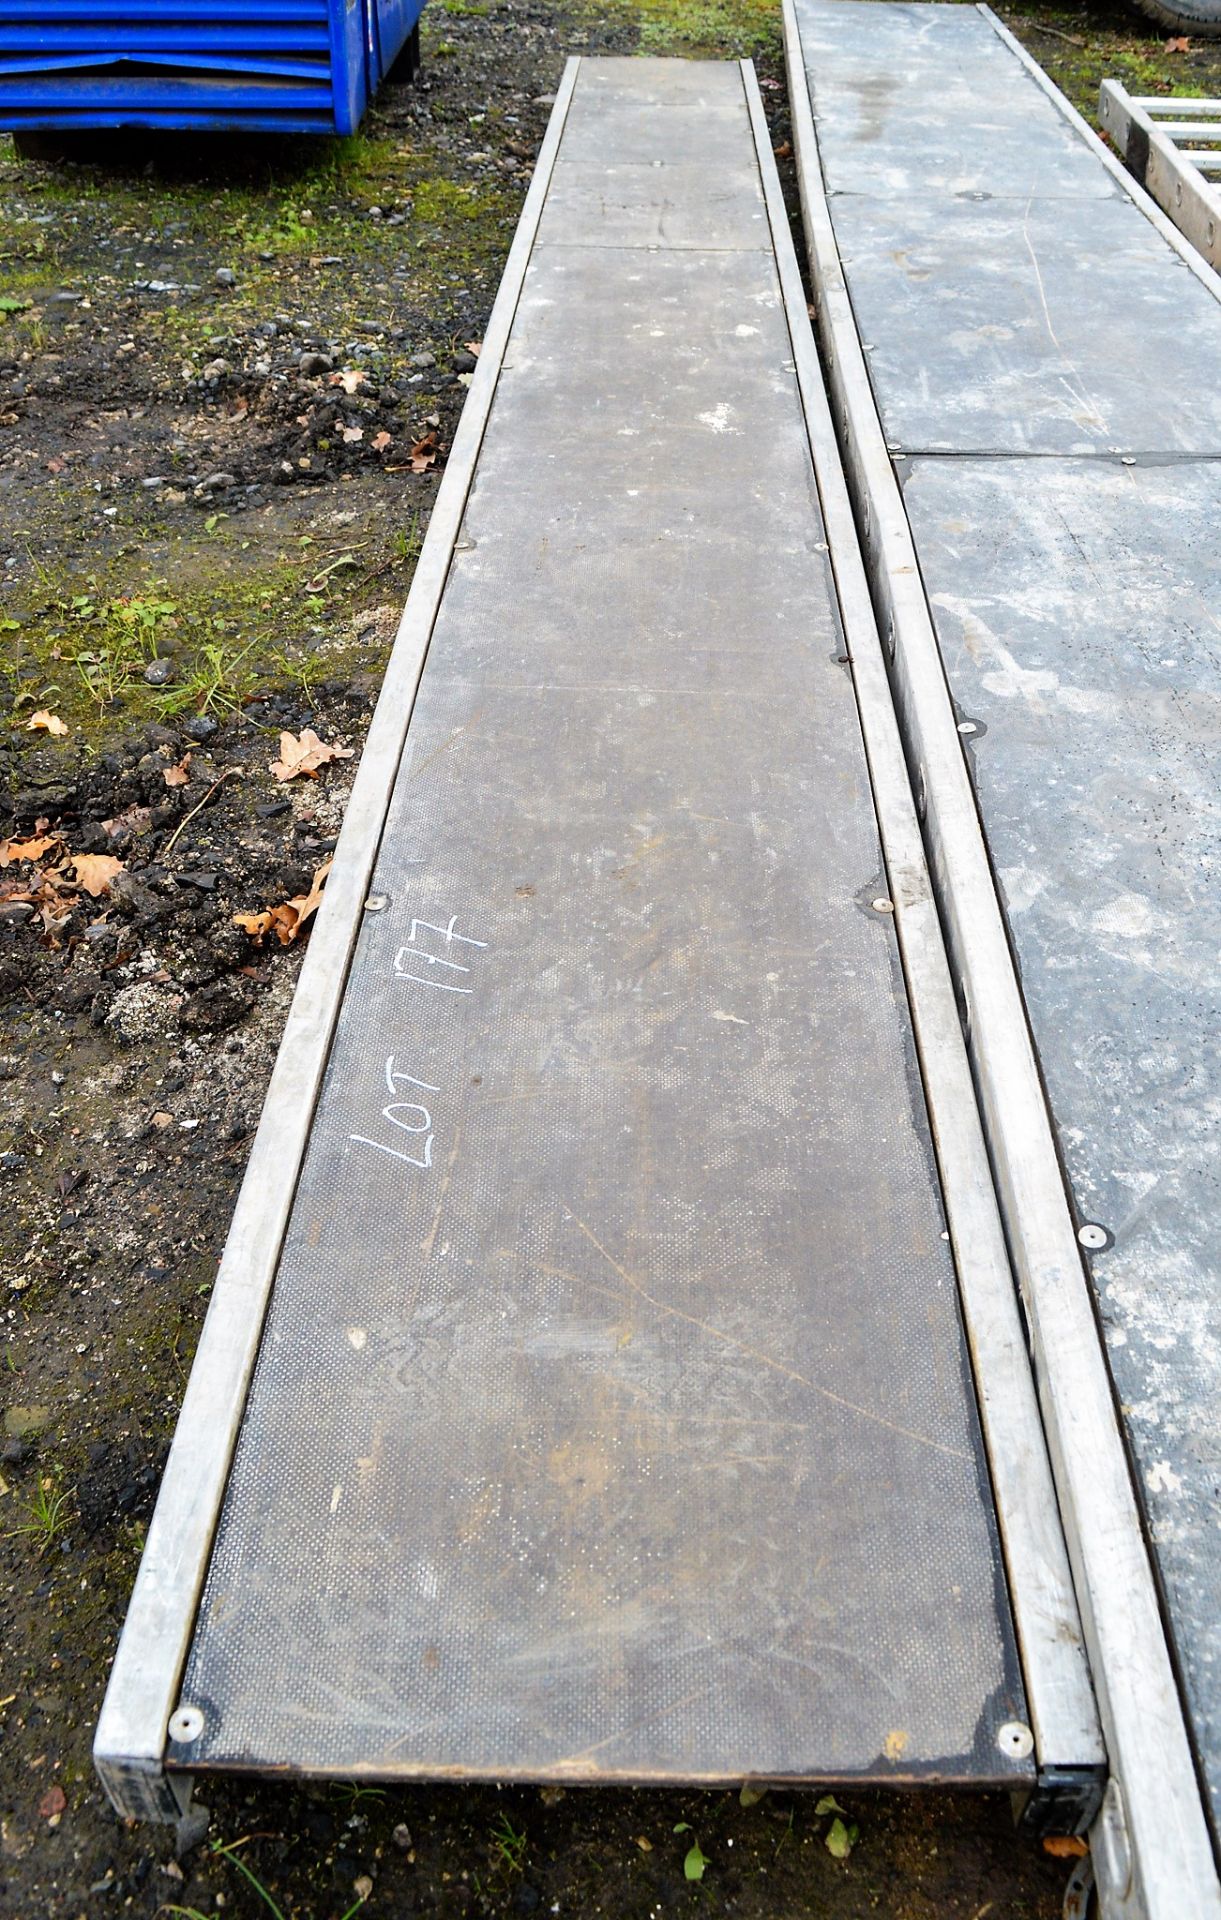 Aluminium staging board approximately 12 ft long